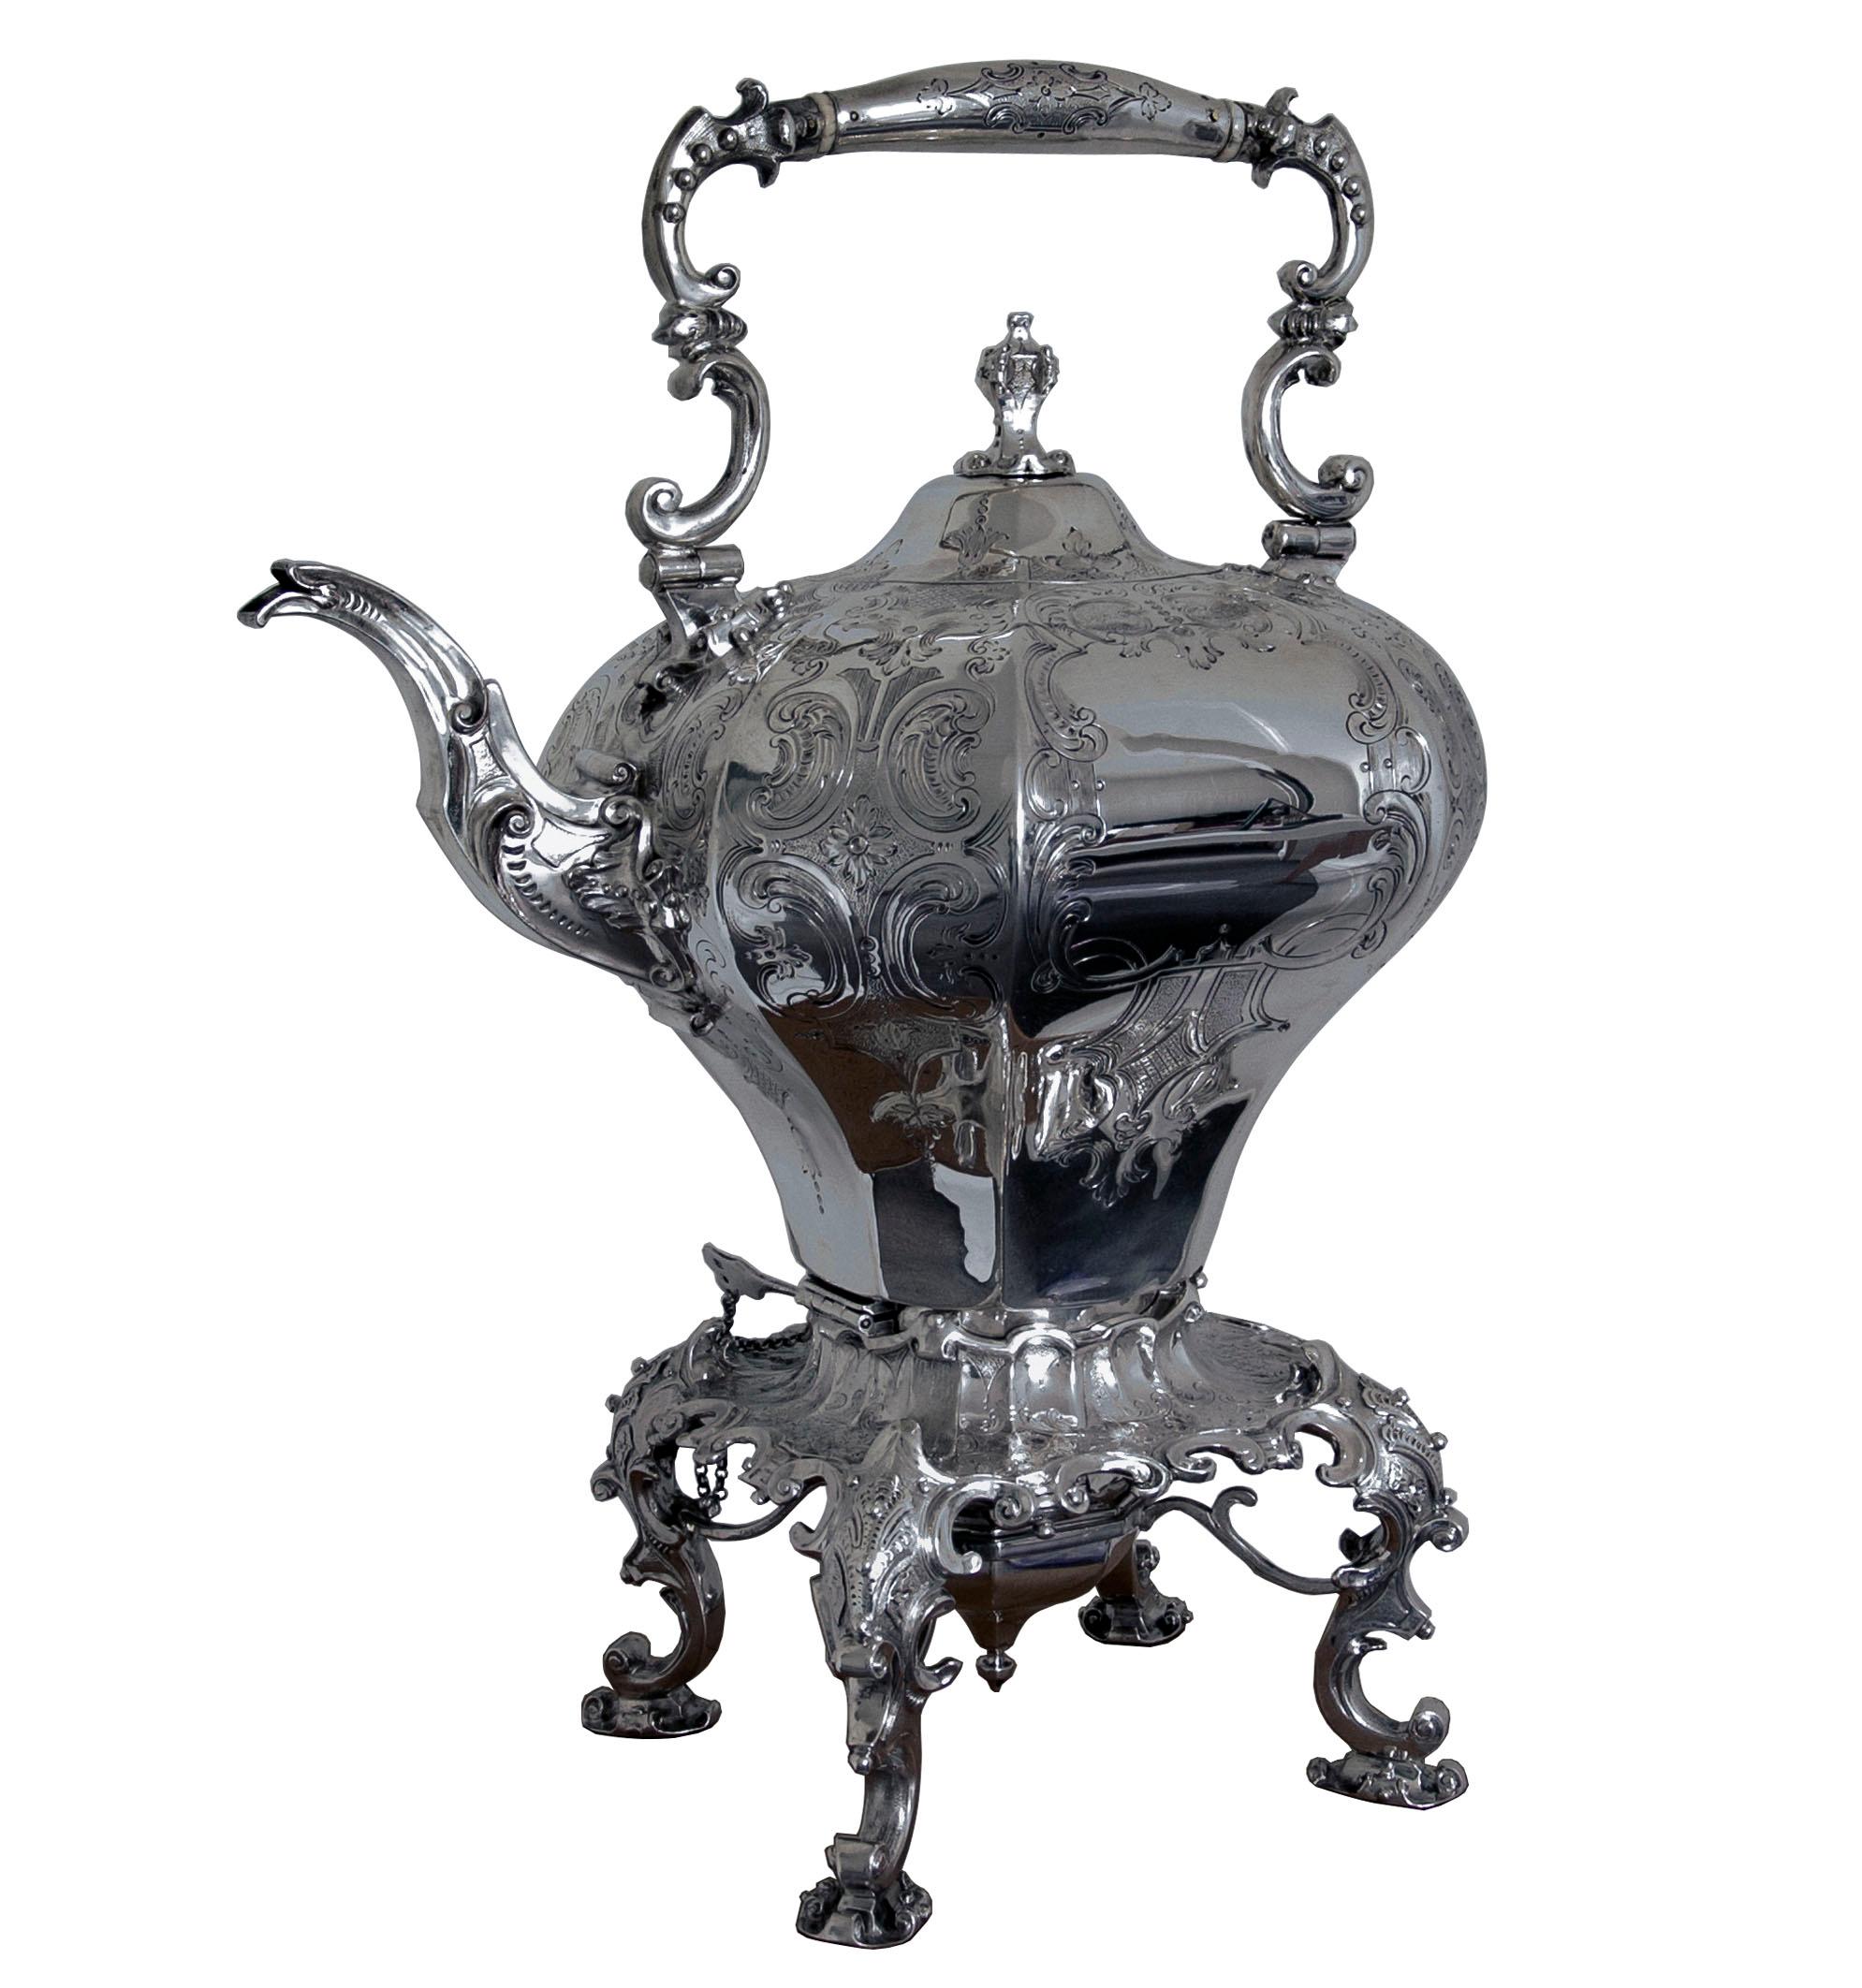 A large decorative Victorian silver kettle on lamp stand. The octagonal kettle standing on a decorative stand supported by four cast legs of scrolling form. The body of the kettle decorated with engraved design and having a decorative cast spout and